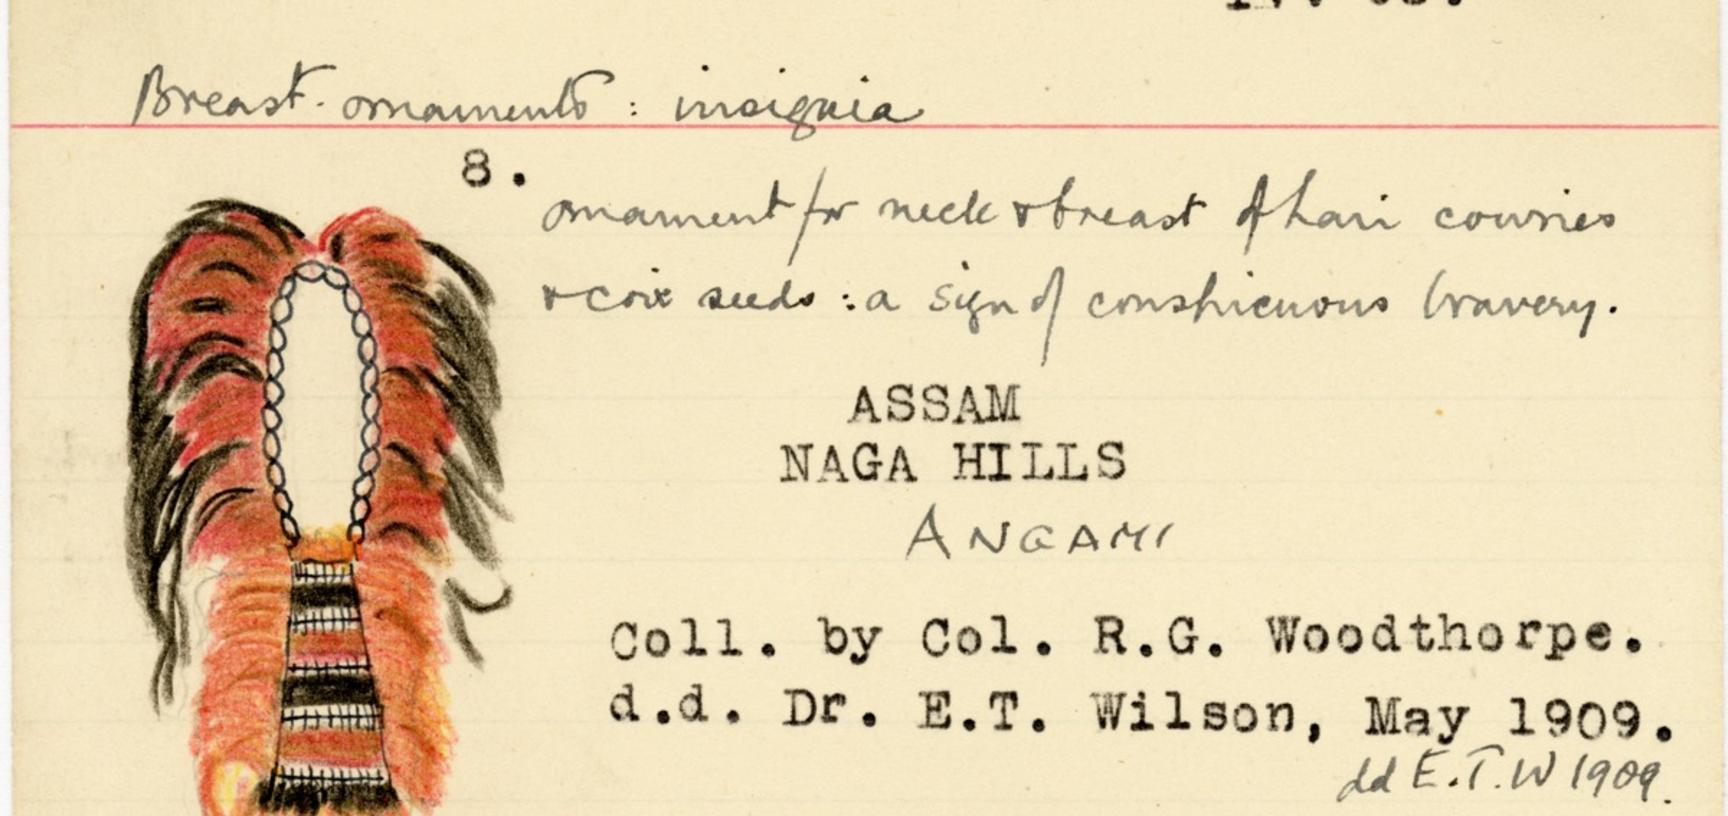 Catalogue index card for an Angami Naga neck and breast ornament: ‘Ornament for neck & breast of hair[,] cowries & coix seeds: a sign of conspicuous bravery.’